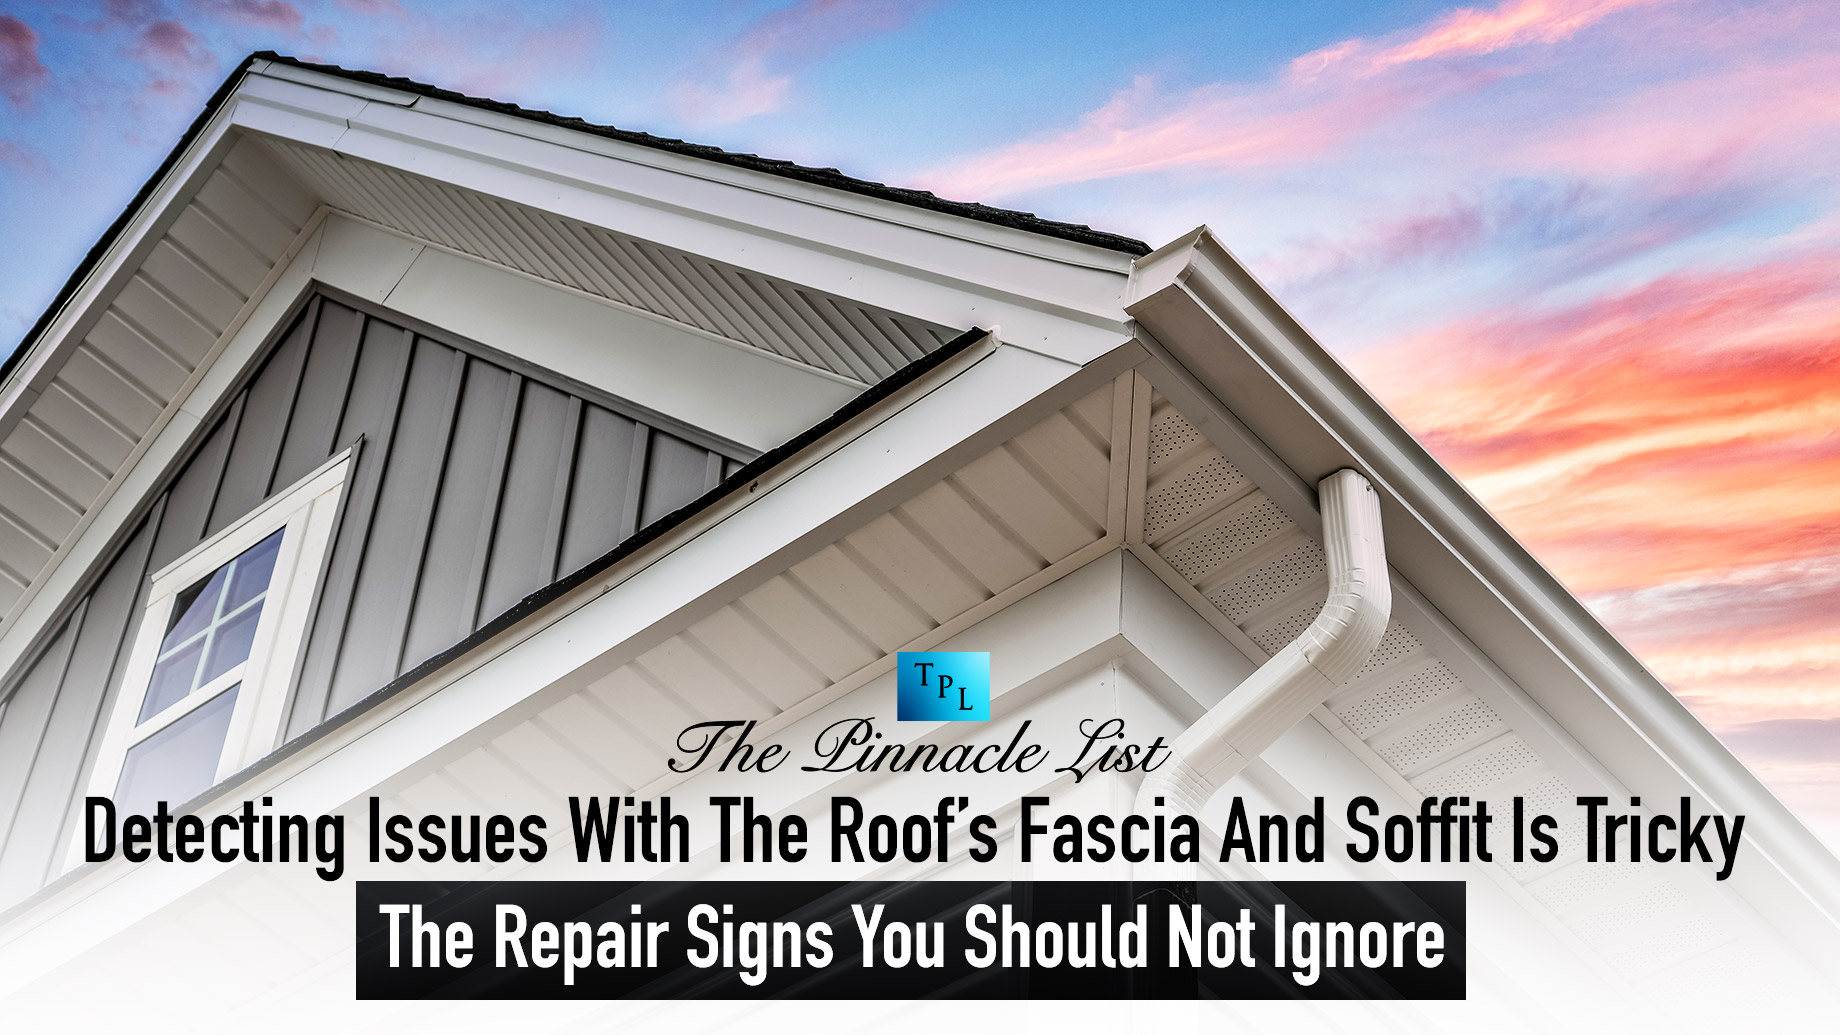 Detecting Issues With The Roof’s Fascia And Soffit Is Tricky - The Repair Signs You Should Not Ignore